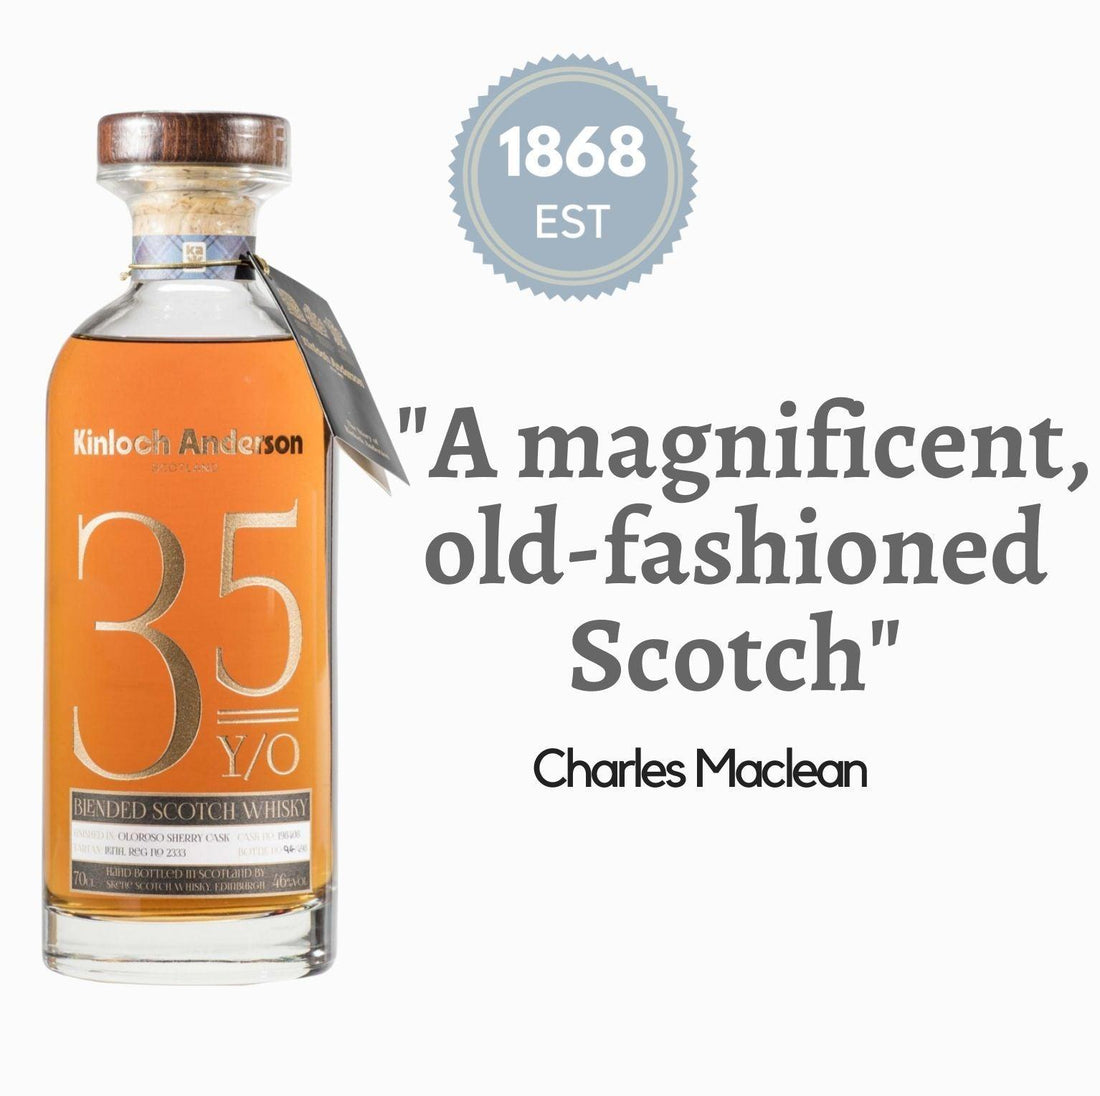 Kinloch Anderson Whisky from Scotland